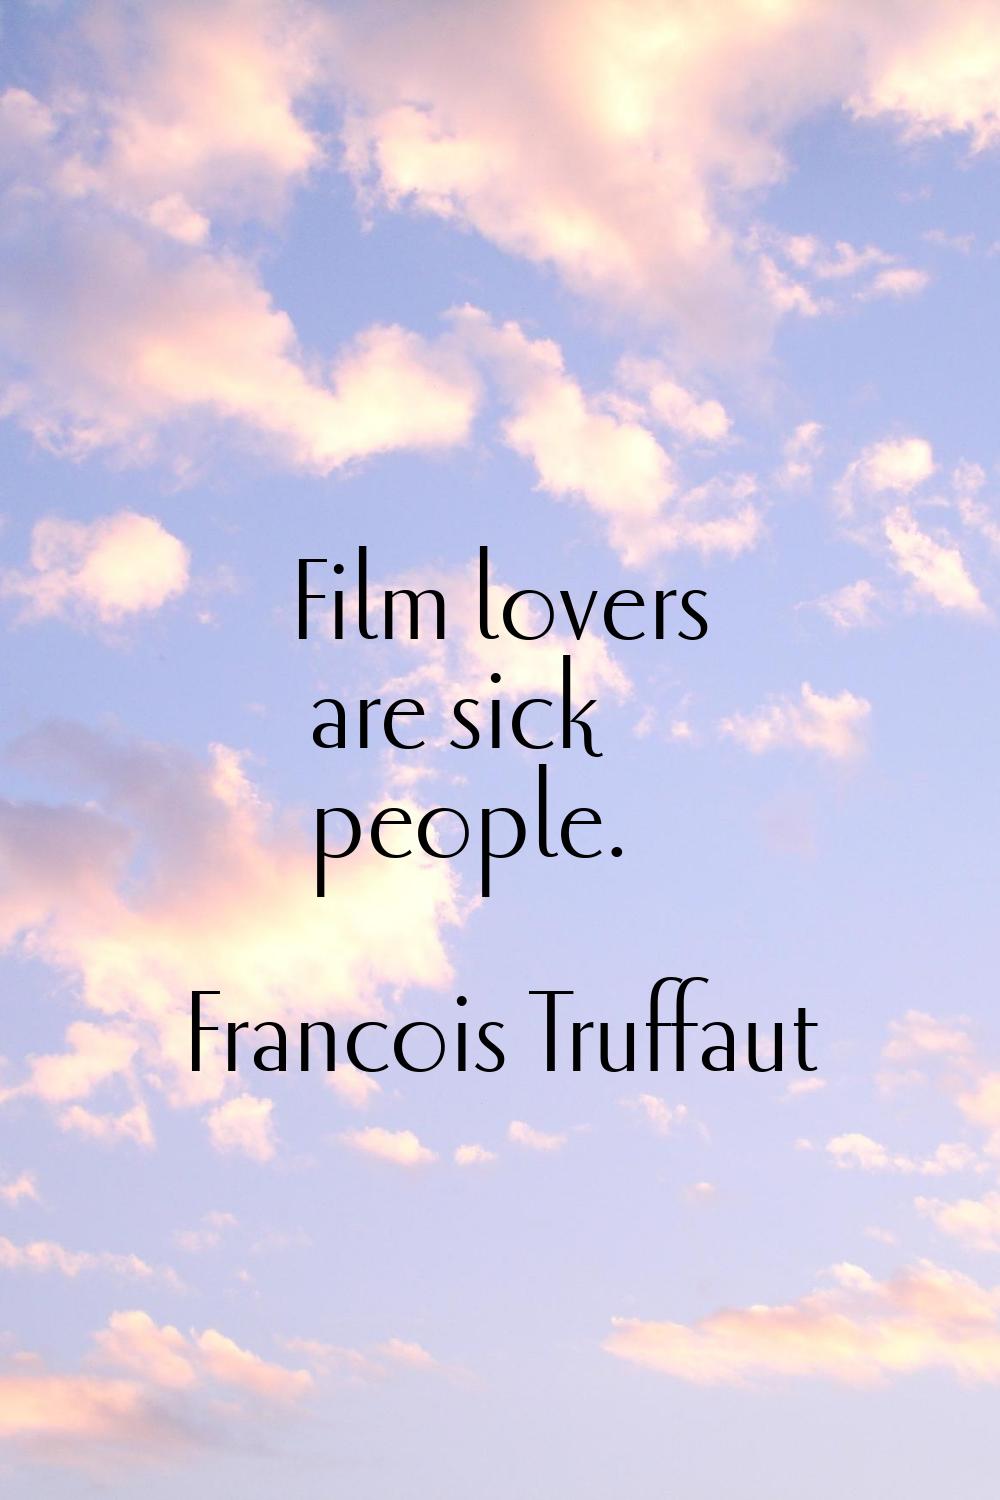 Film lovers are sick people.